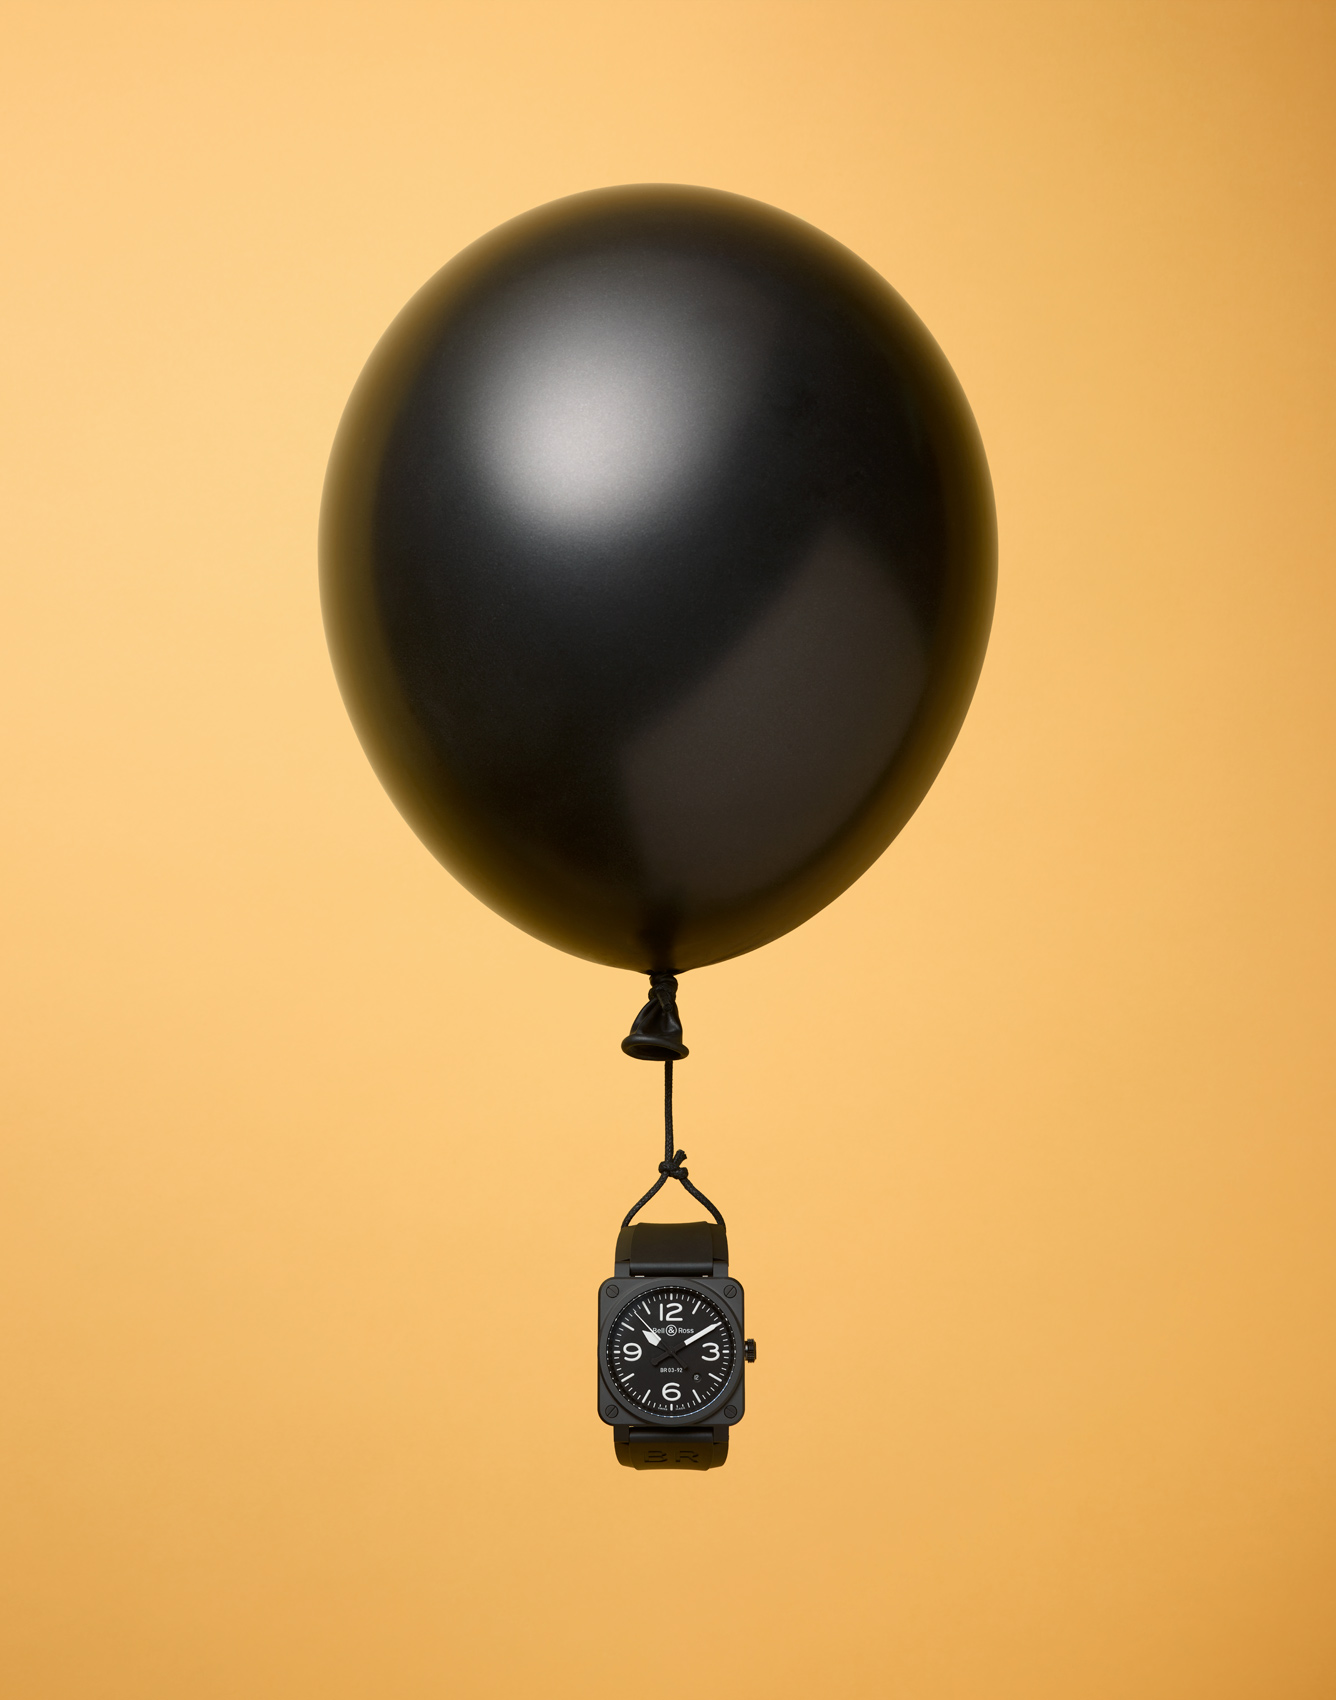 Balloon  by Alexander Kent London based still life and product photographer.